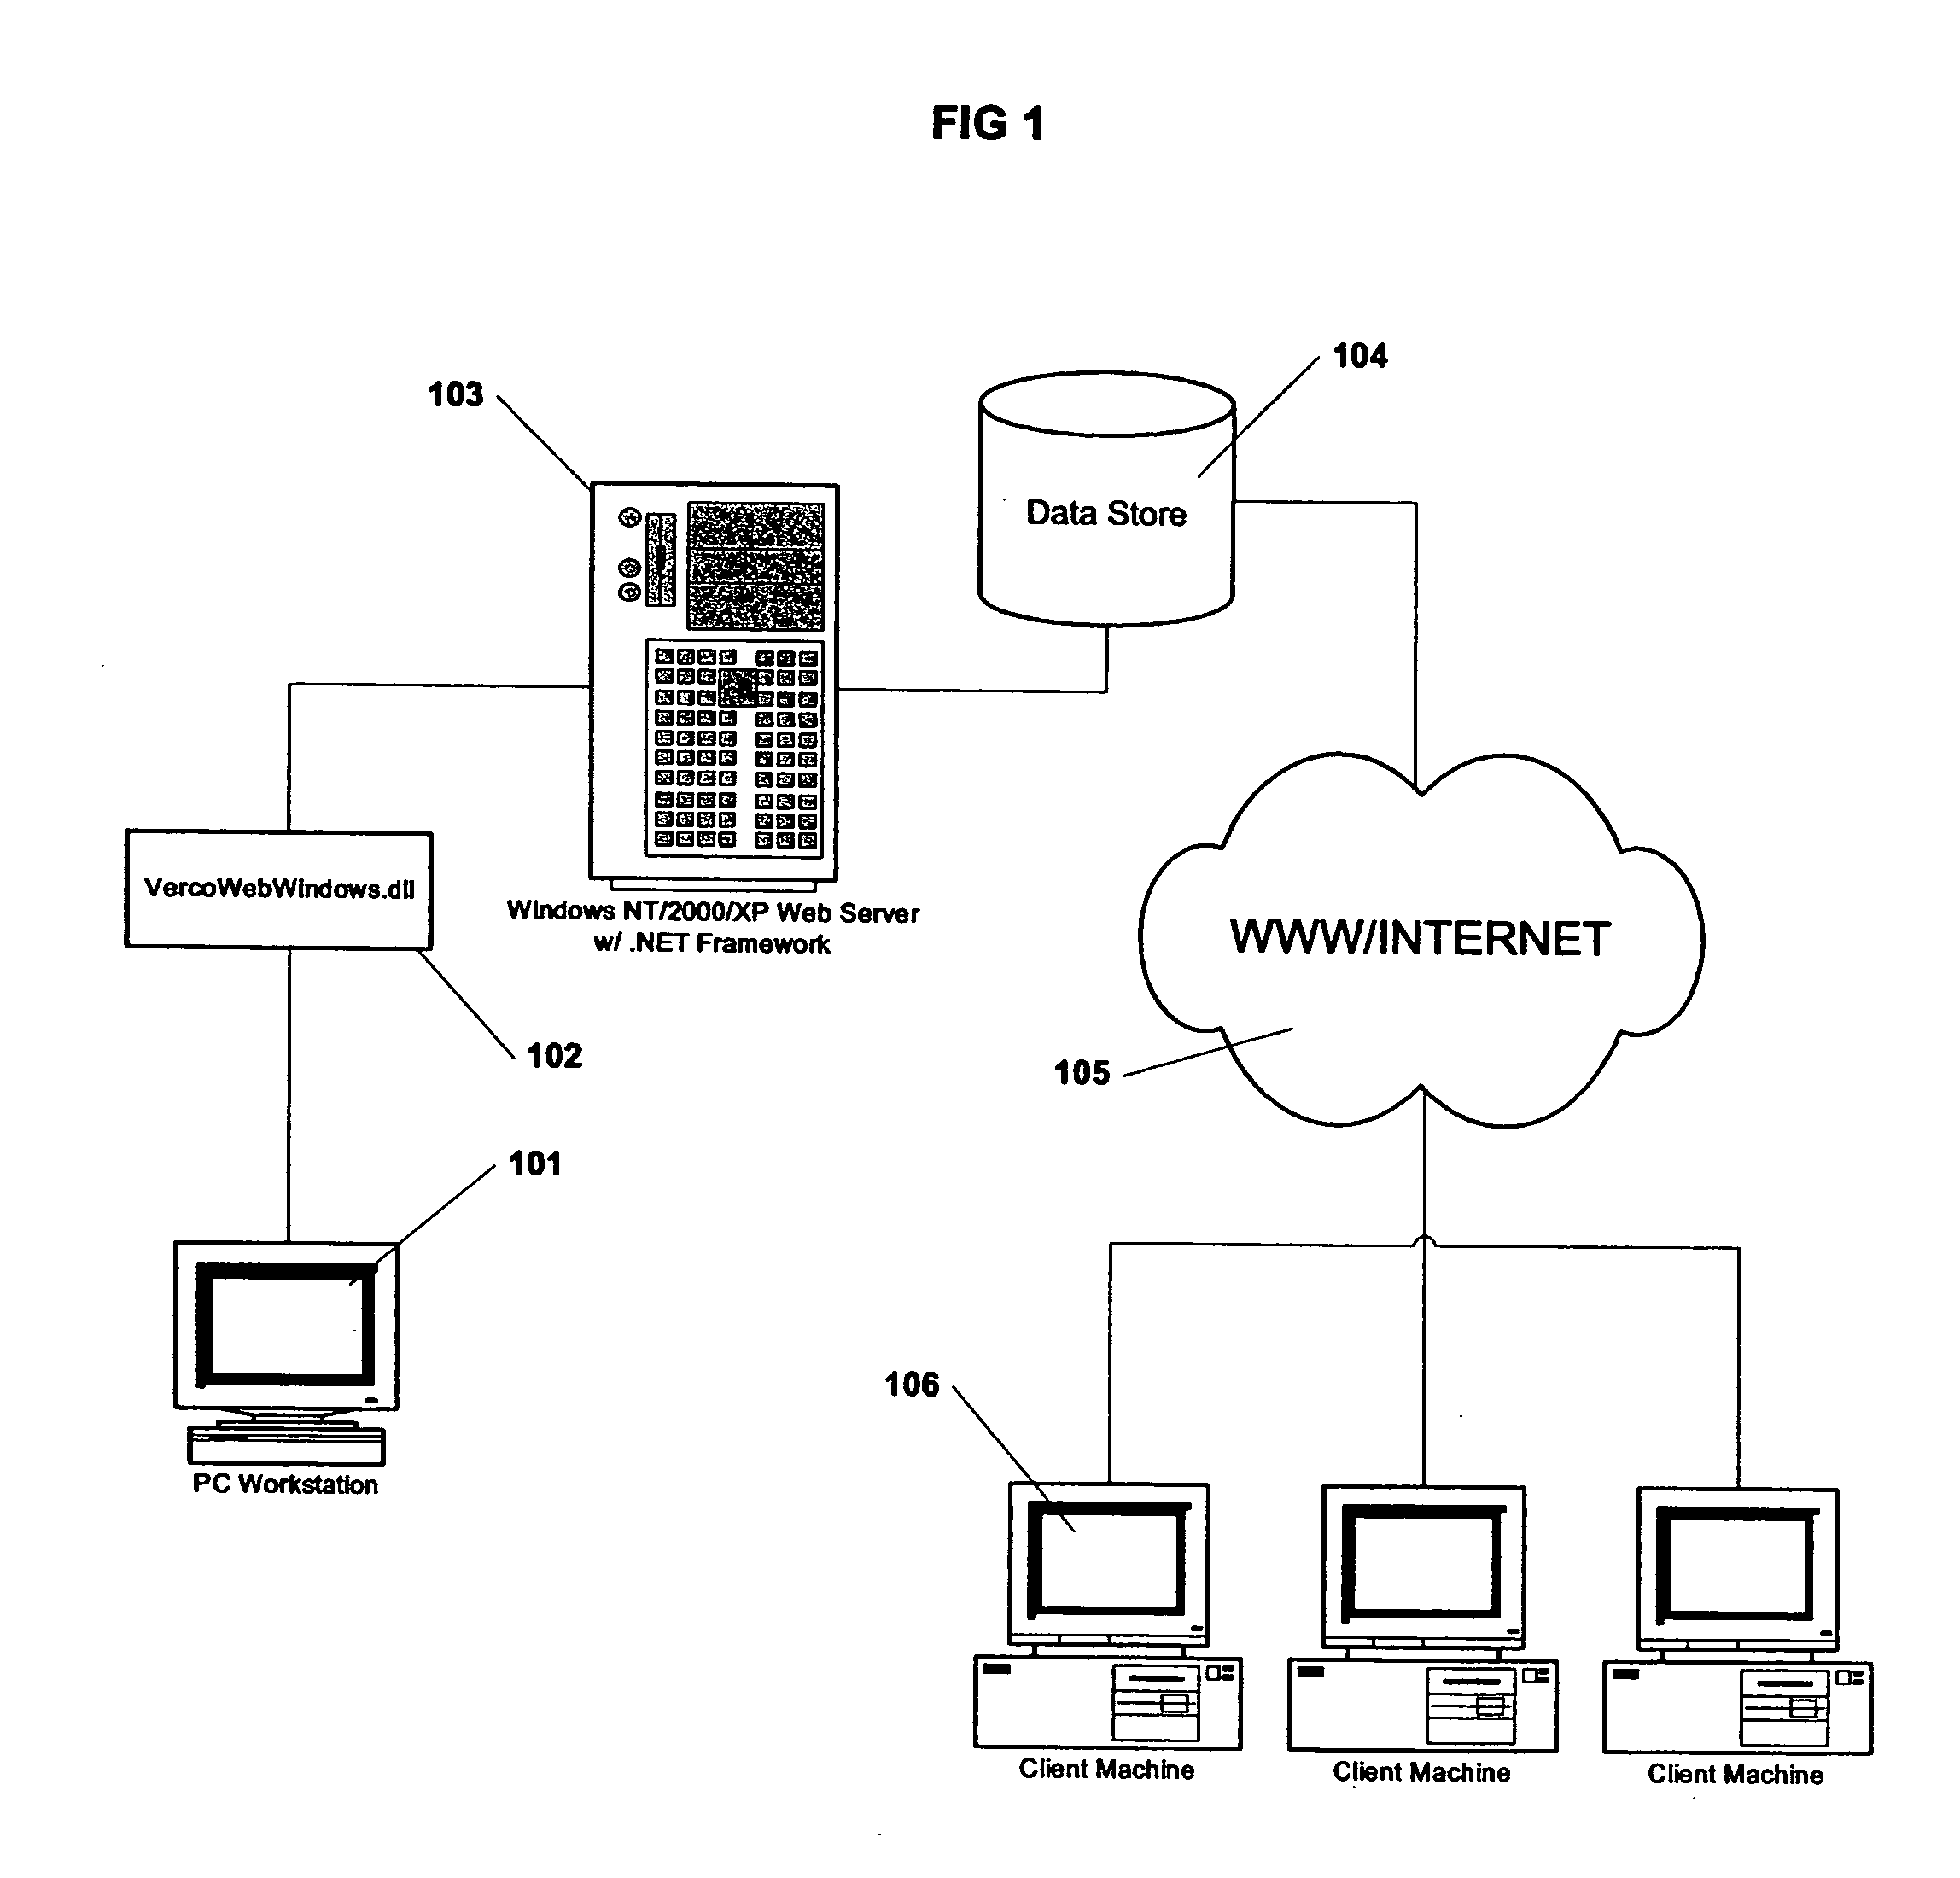 Multi-window based graphical user interface (GUI) for web applications